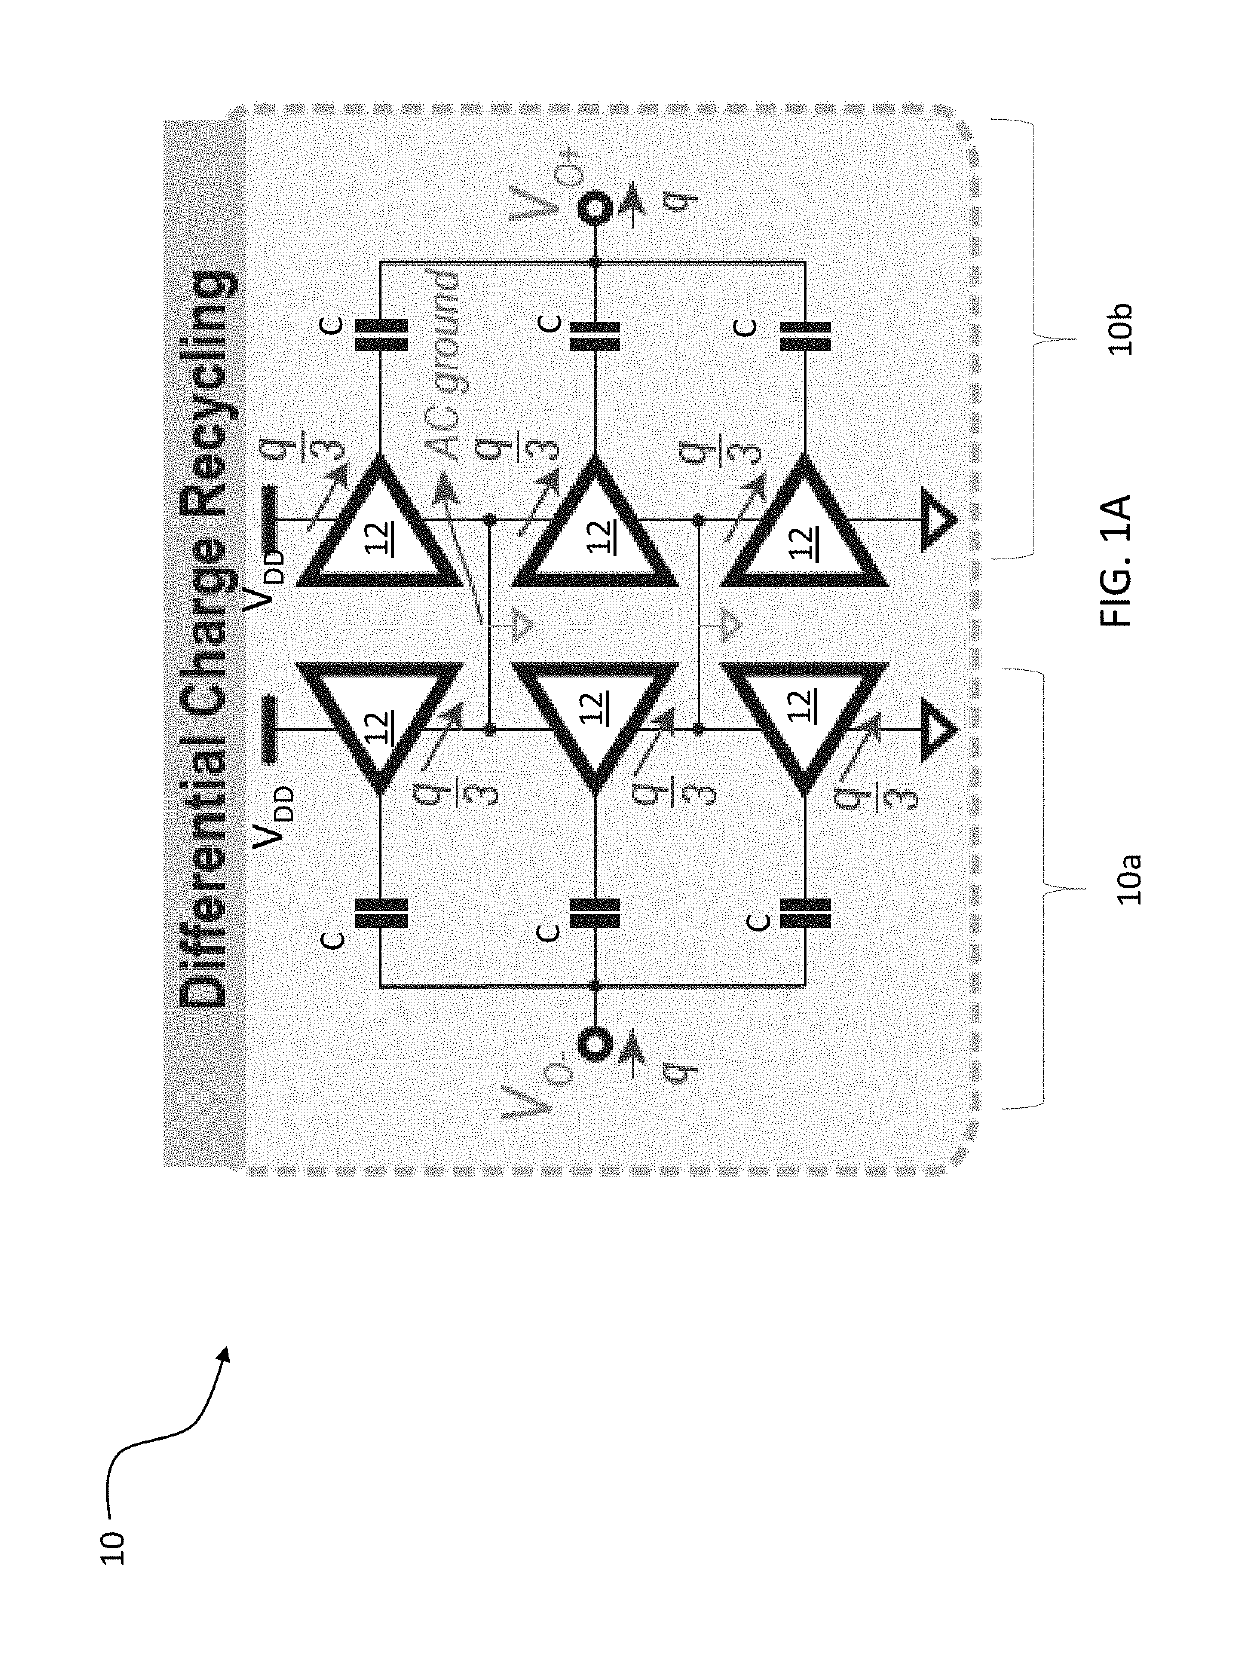 Switched capacitor house of cards power amplifier